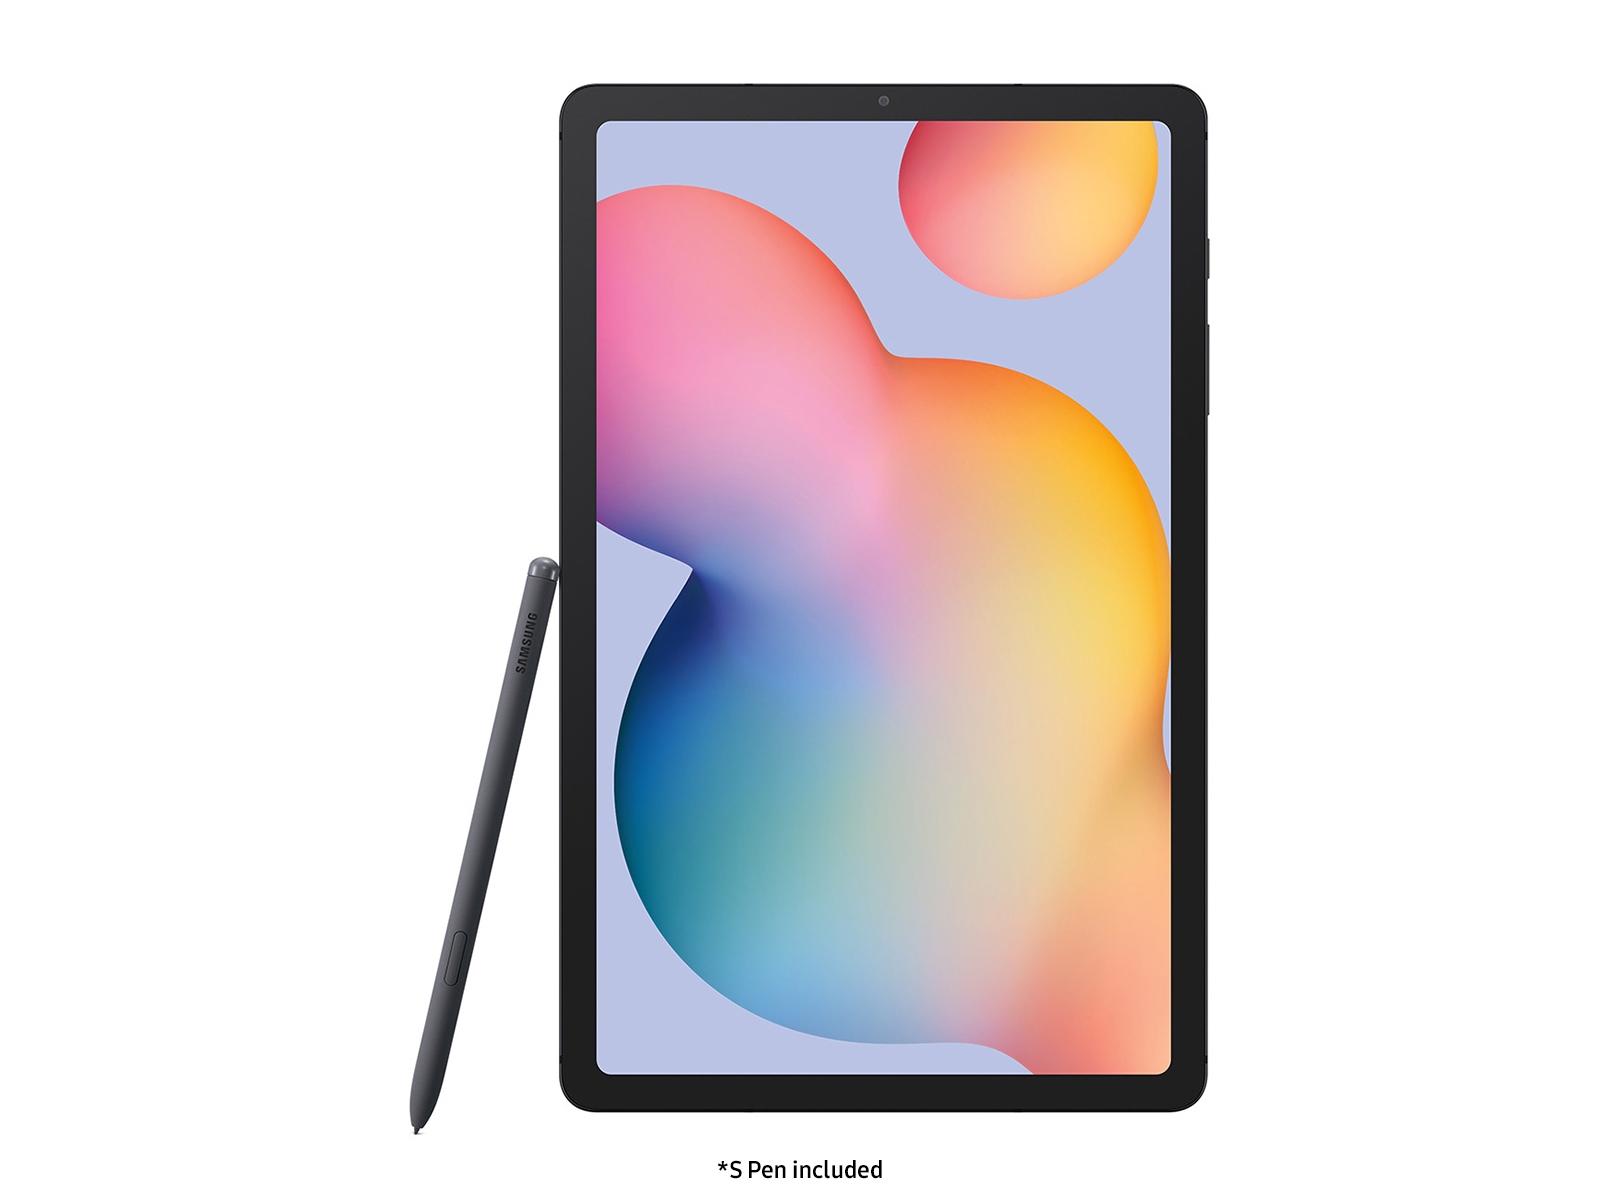 Thumbnail image of Galaxy Tab S6 Lite, 128GB, Oxford Gray (Wi-Fi) S Pen included